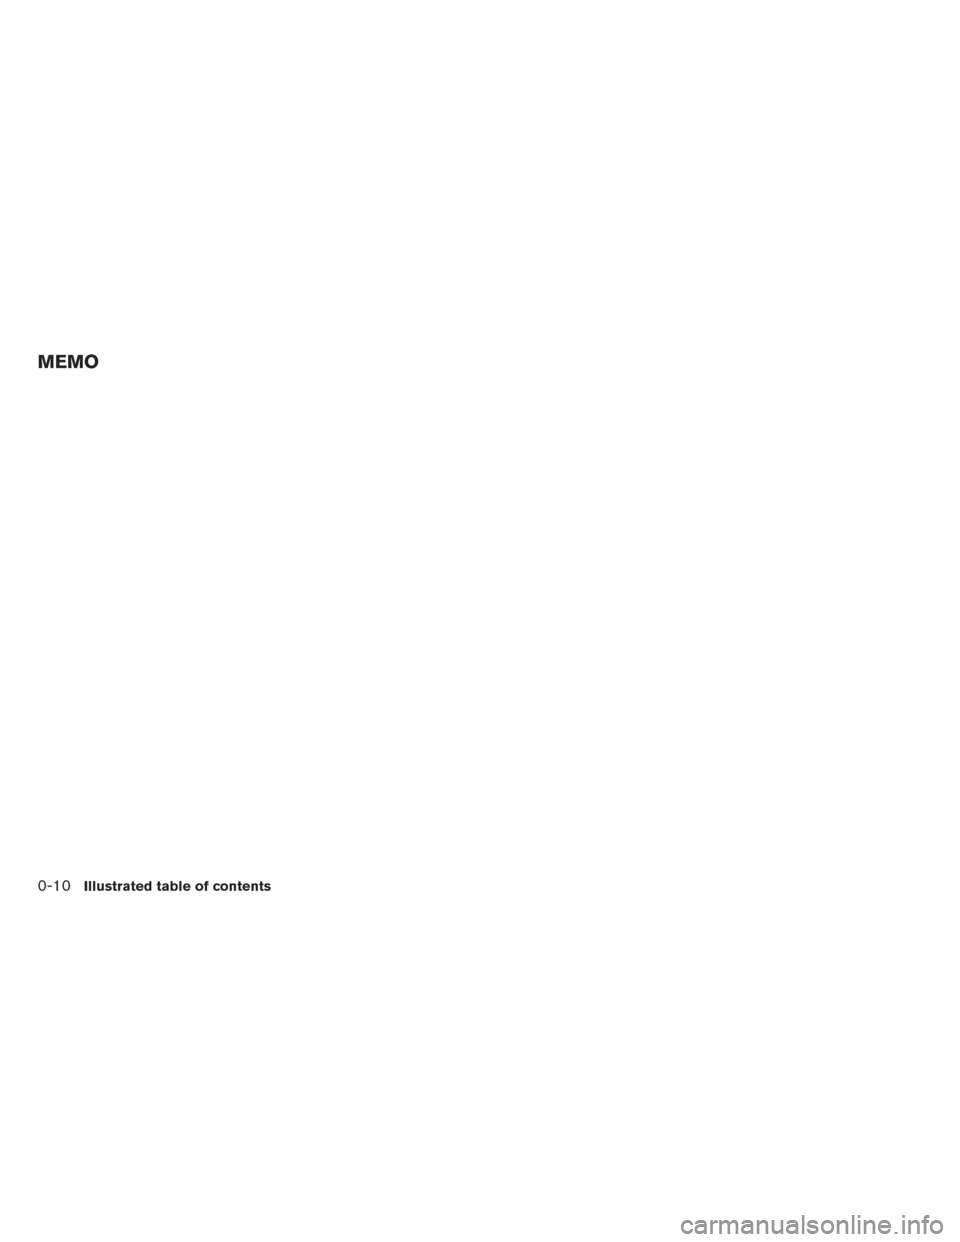 NISSAN PATHFINDER 2014 R52 / 4.G User Guide MEMO
0-10Illustrated table of contents 